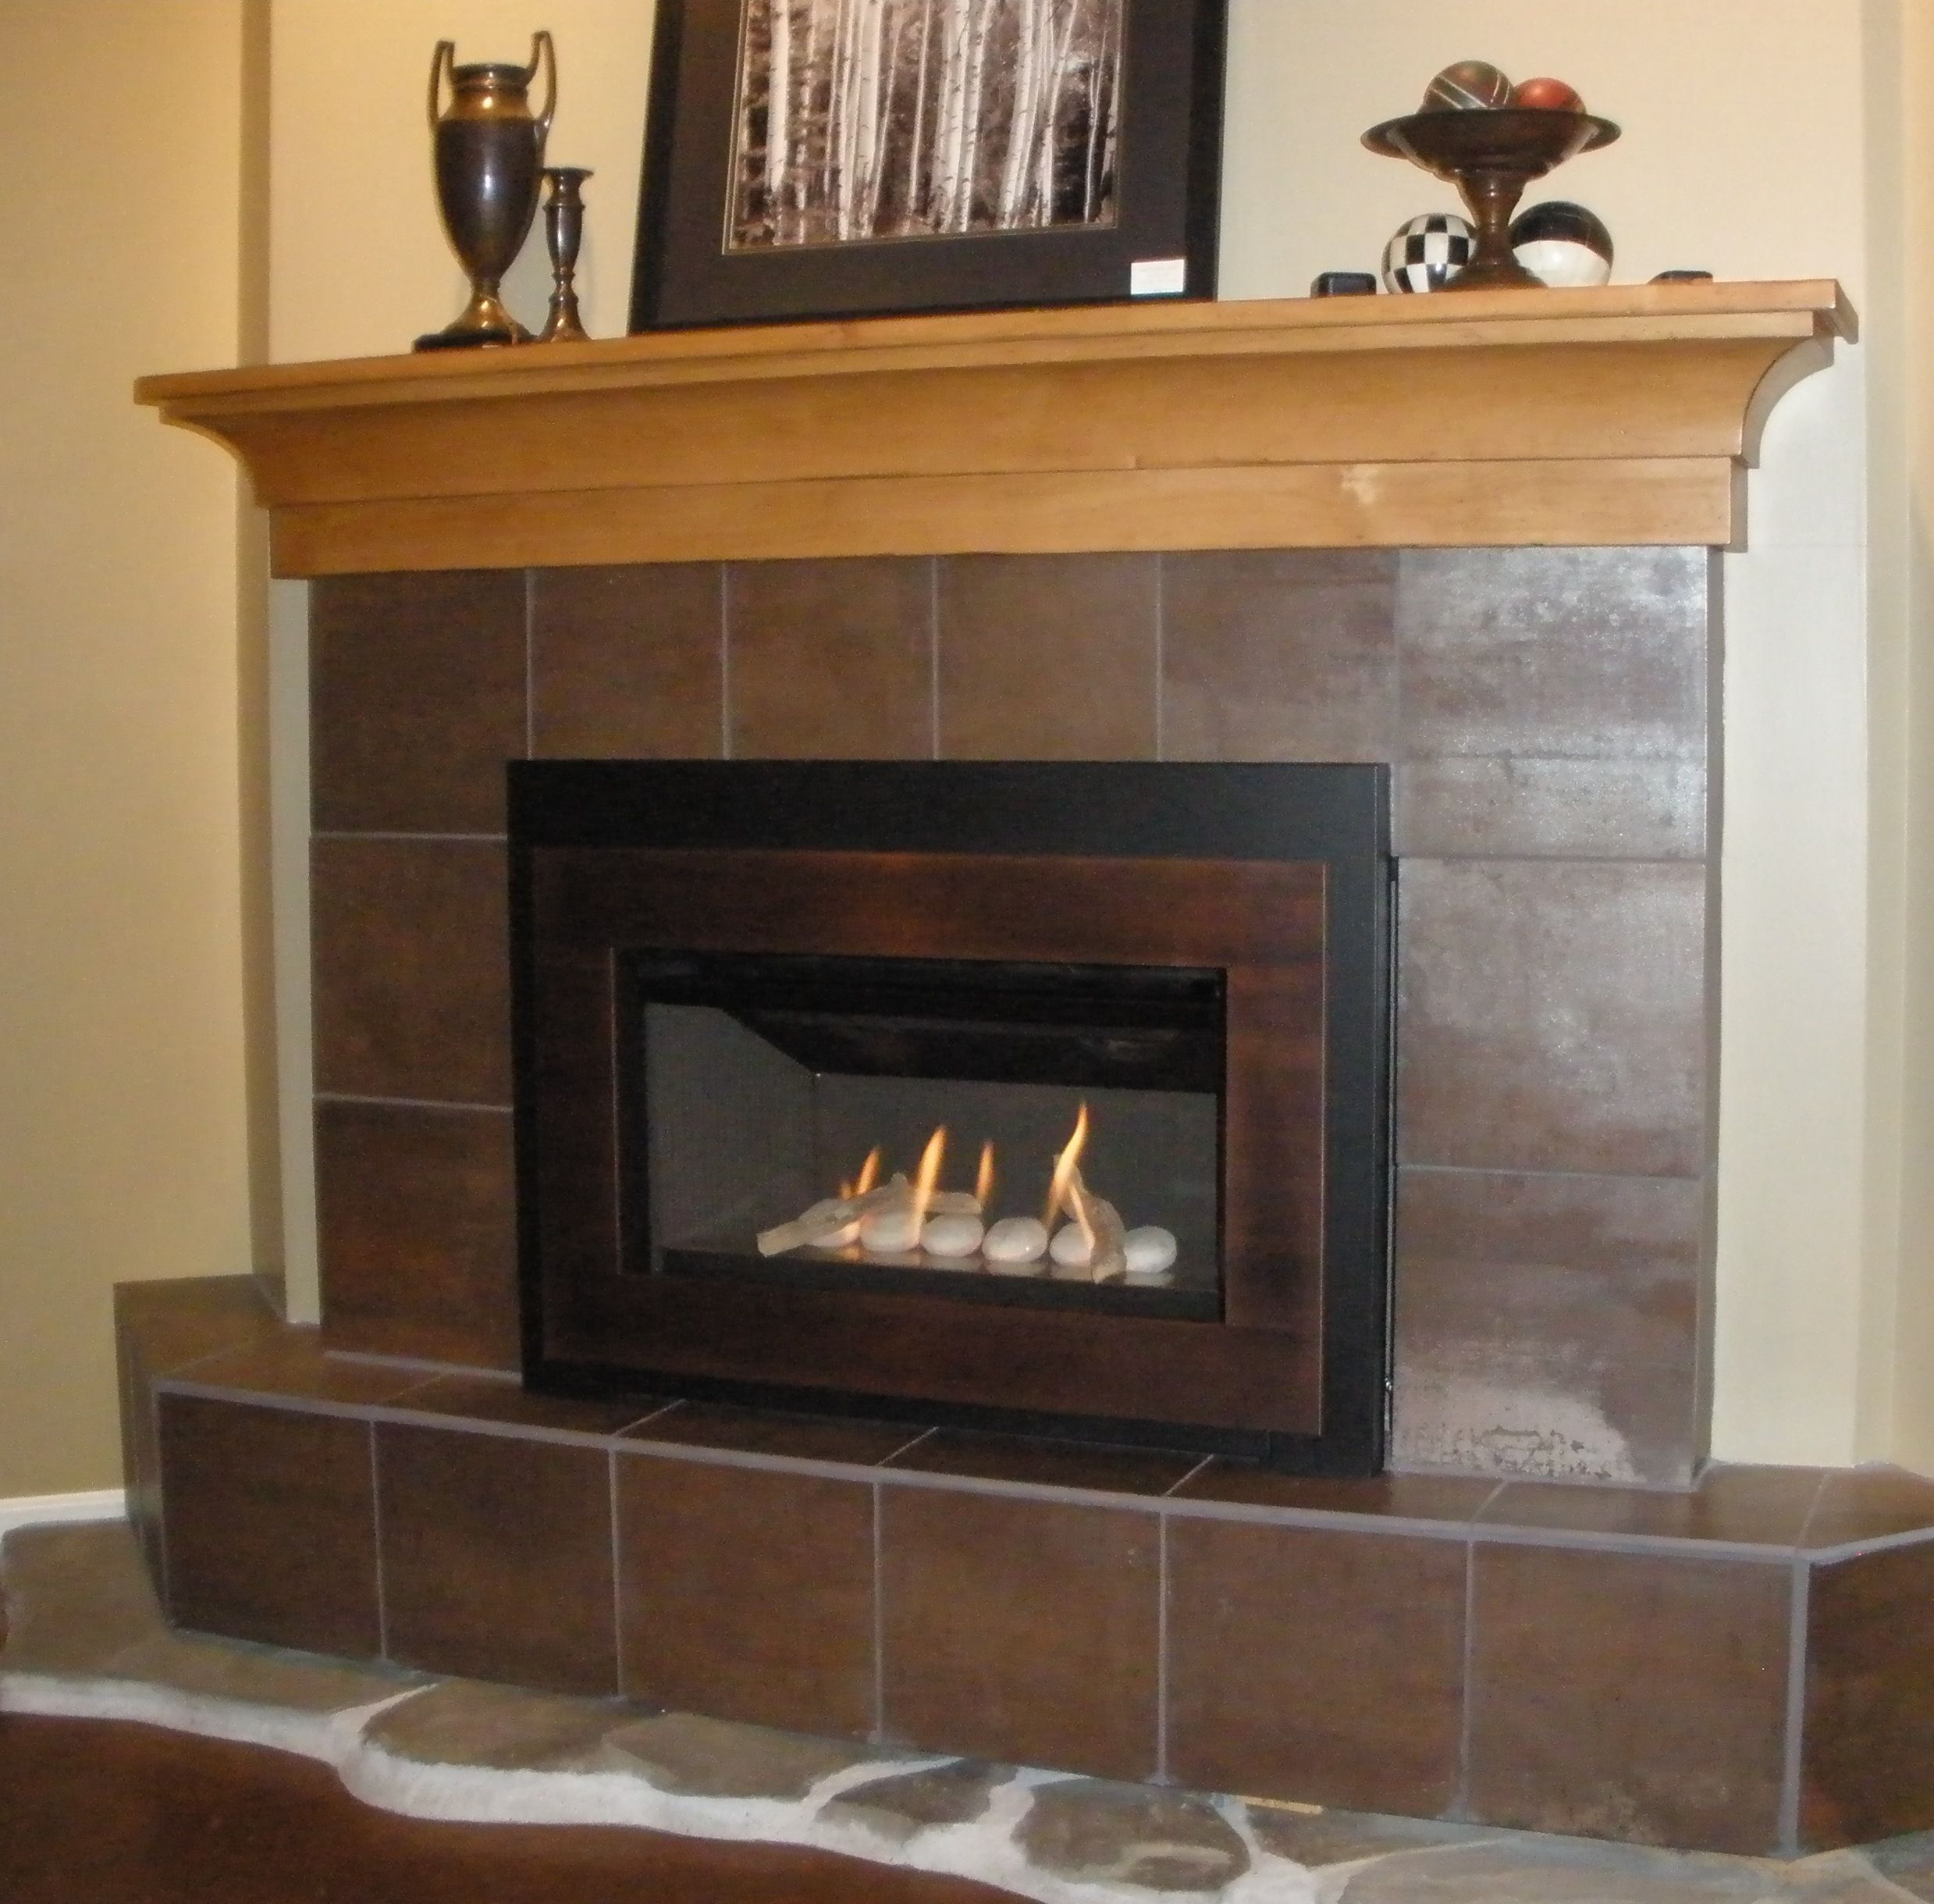 Inset Fireplace New Pin On Valor Radiant Gas Fireplaces Midwest Dealer